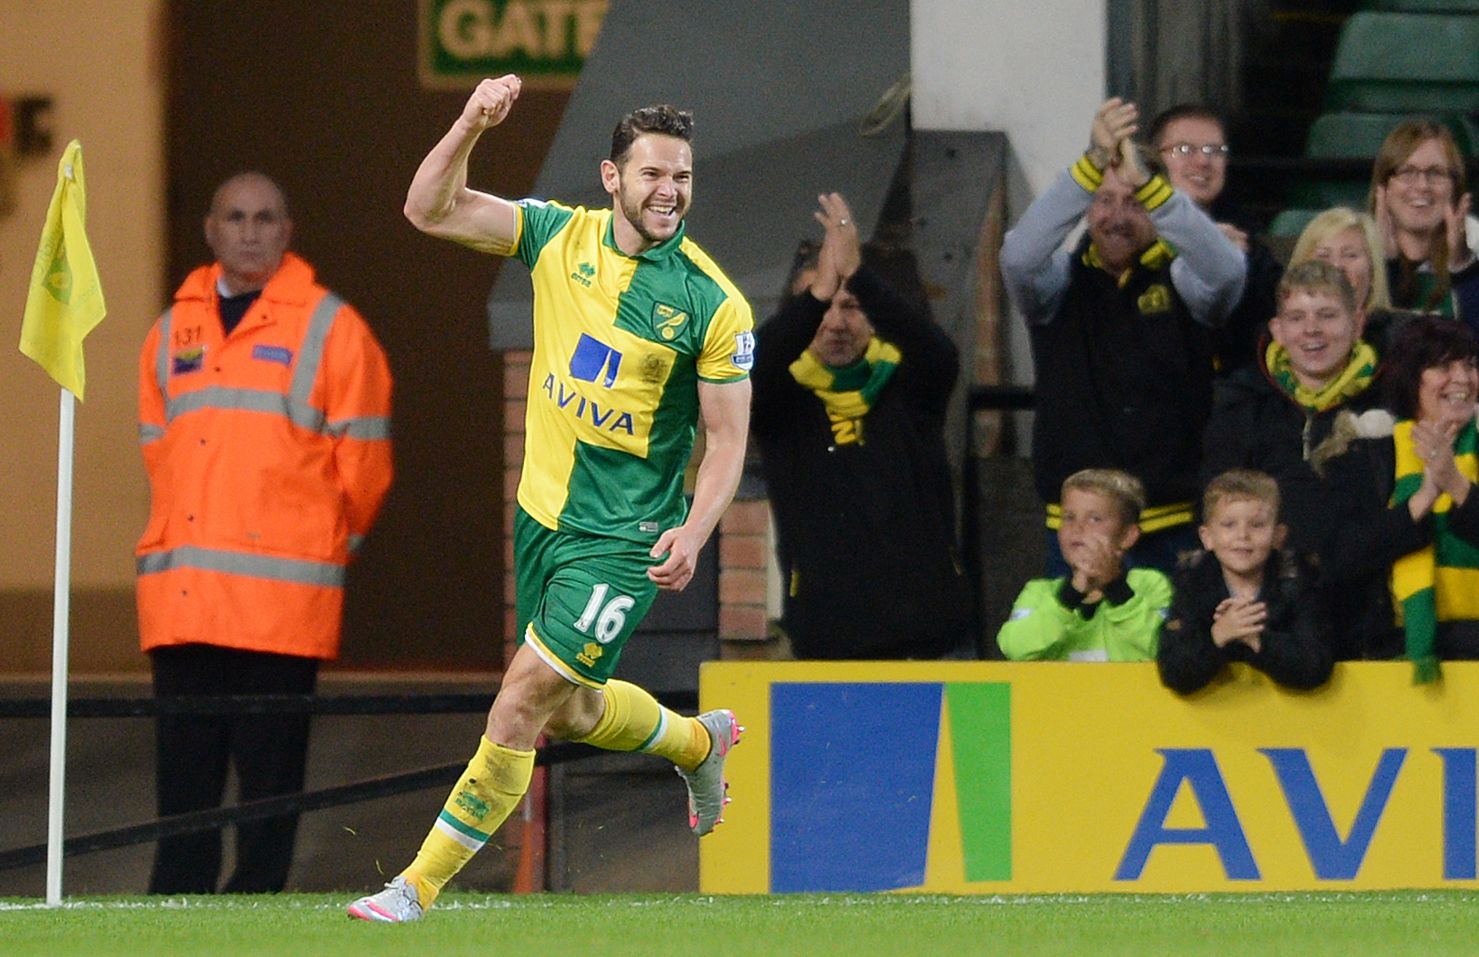 Football - Norwich City v West Bromwich Albion - Capital One Cup Third Round - Carrow Road - 23/9/15 
Norwich's Matt Jarvis celebrates scoring their first goal 
Mandatory Credit: Action Images / Alan Walter 
Livepic 
EDITORIAL USE ONLY. No use with unauthorized audio, video, data, fixture lists, club/league logos or 